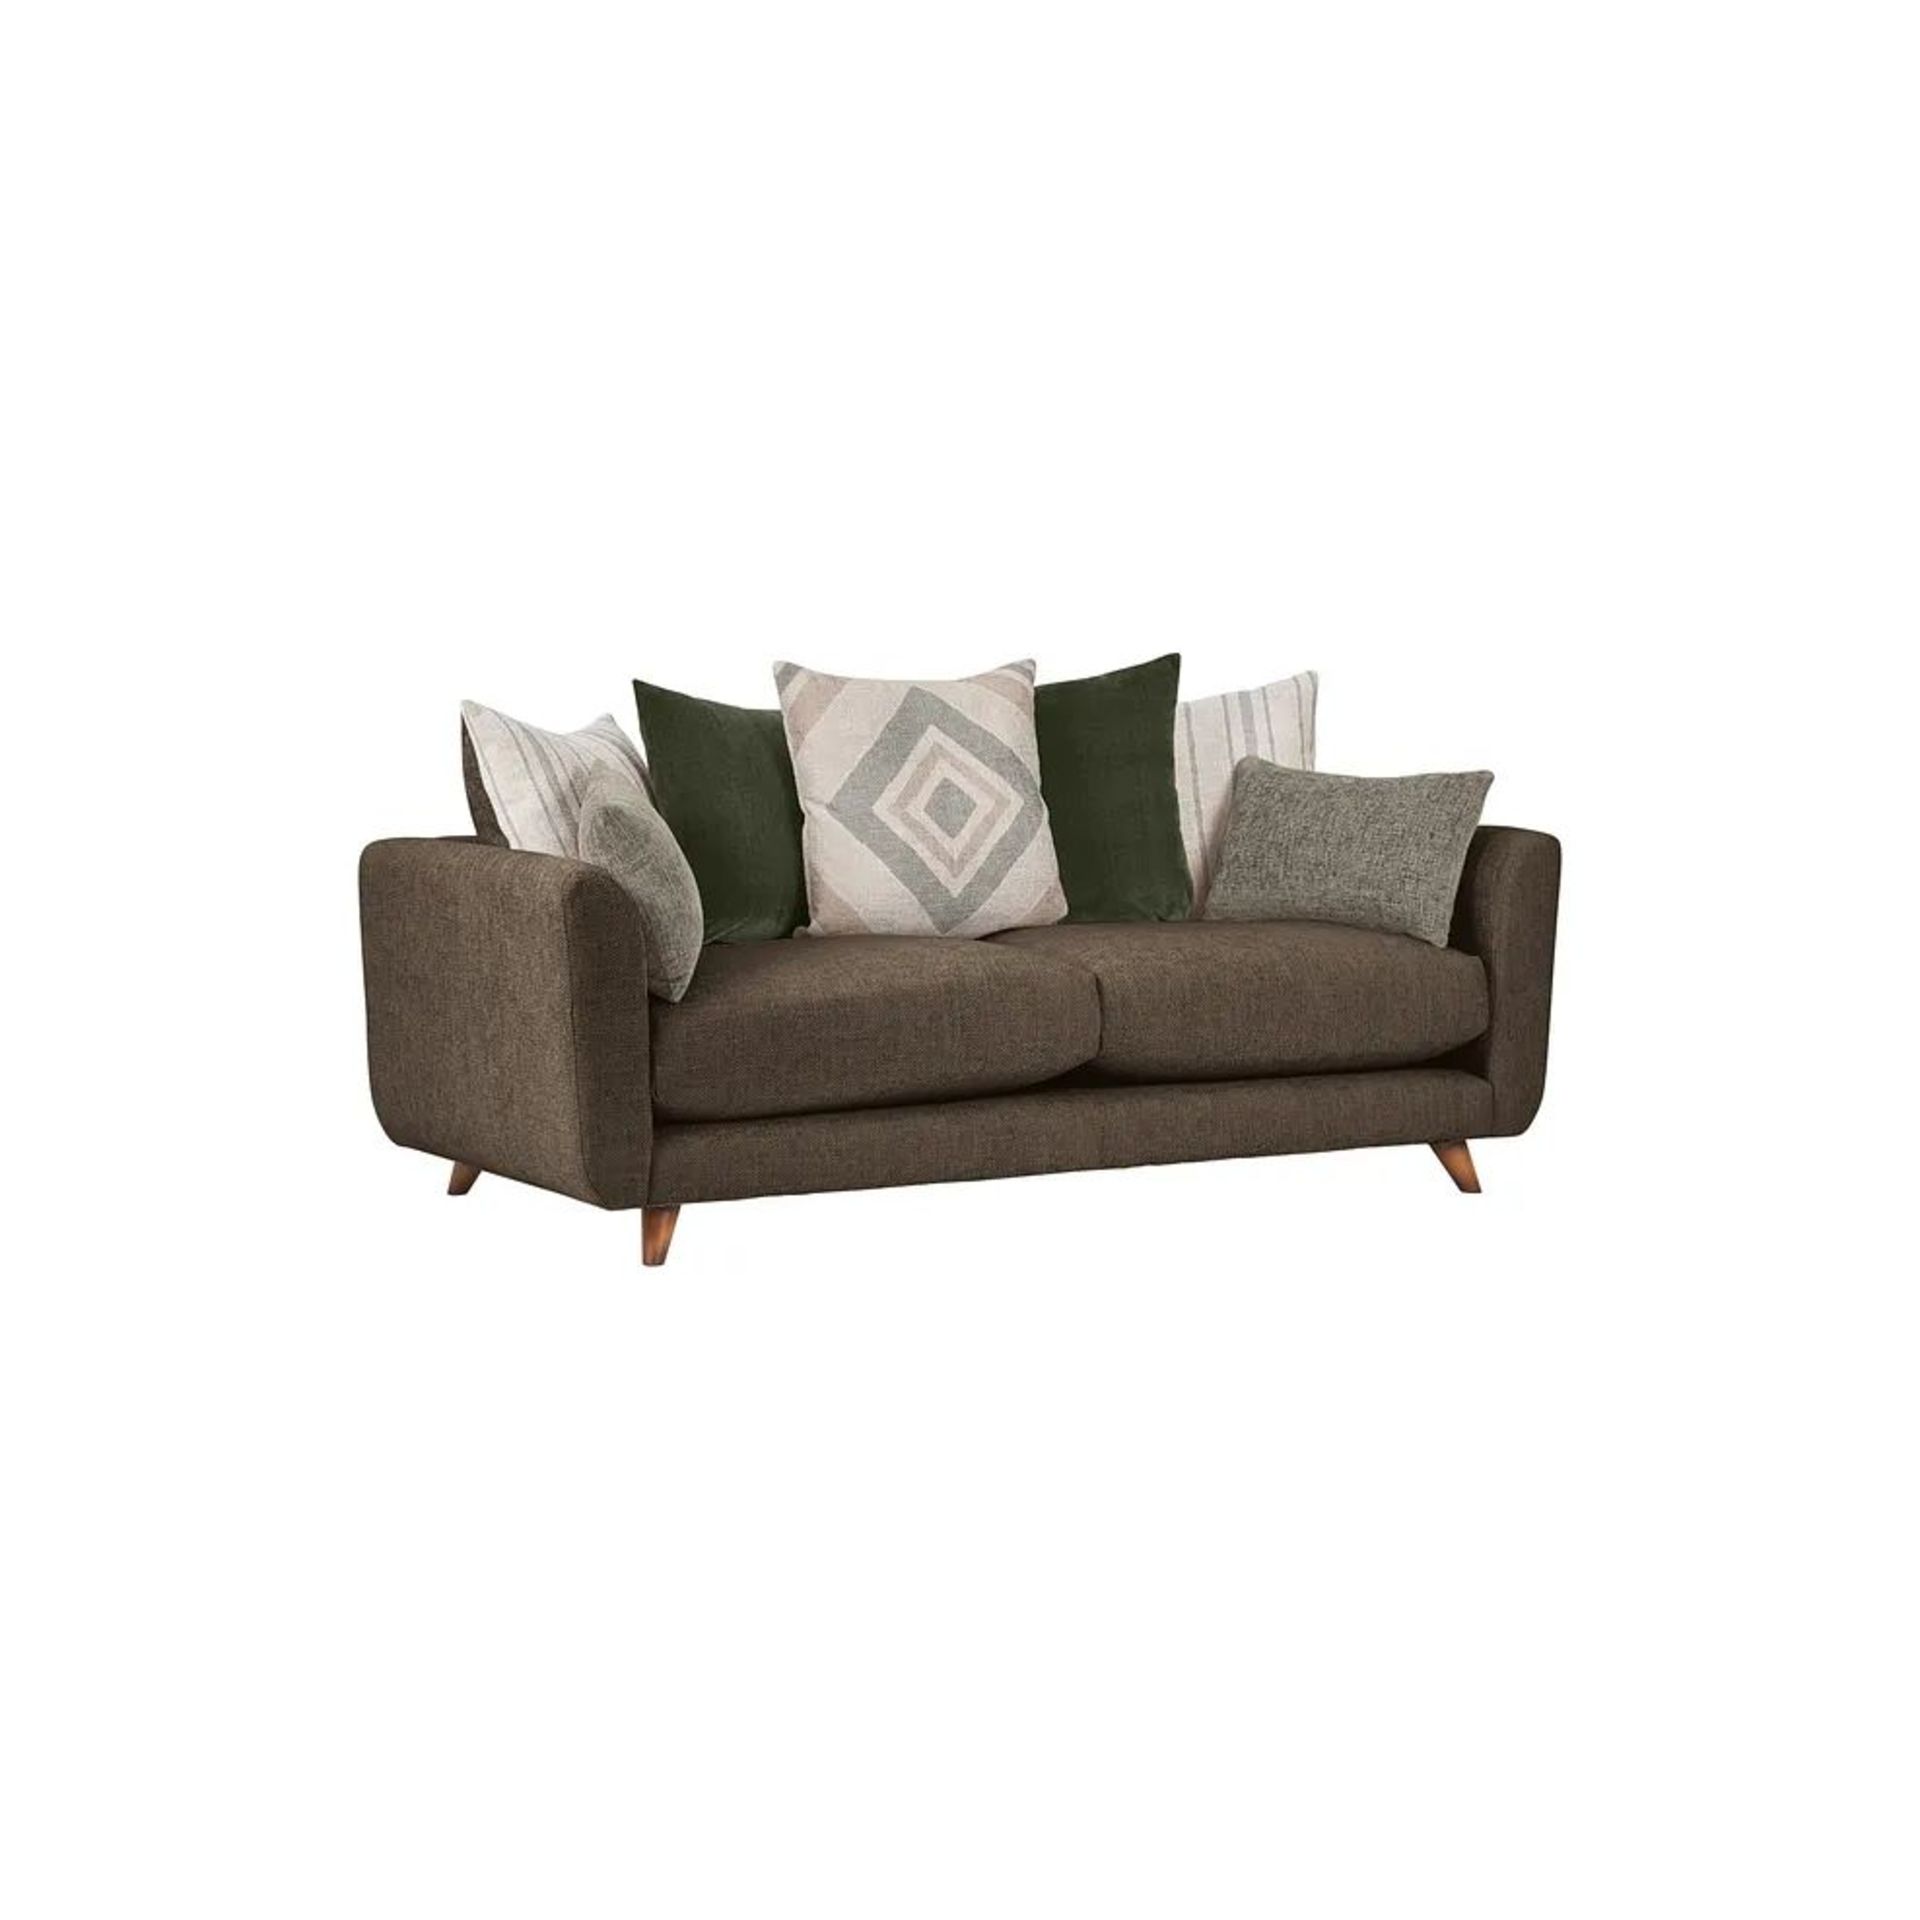 BRAND NEW WILLOUGHBY 4 Seater Pillow Back Sofa - COCOA FABRIC. RRP £1799. Our Willoughby 4-seater